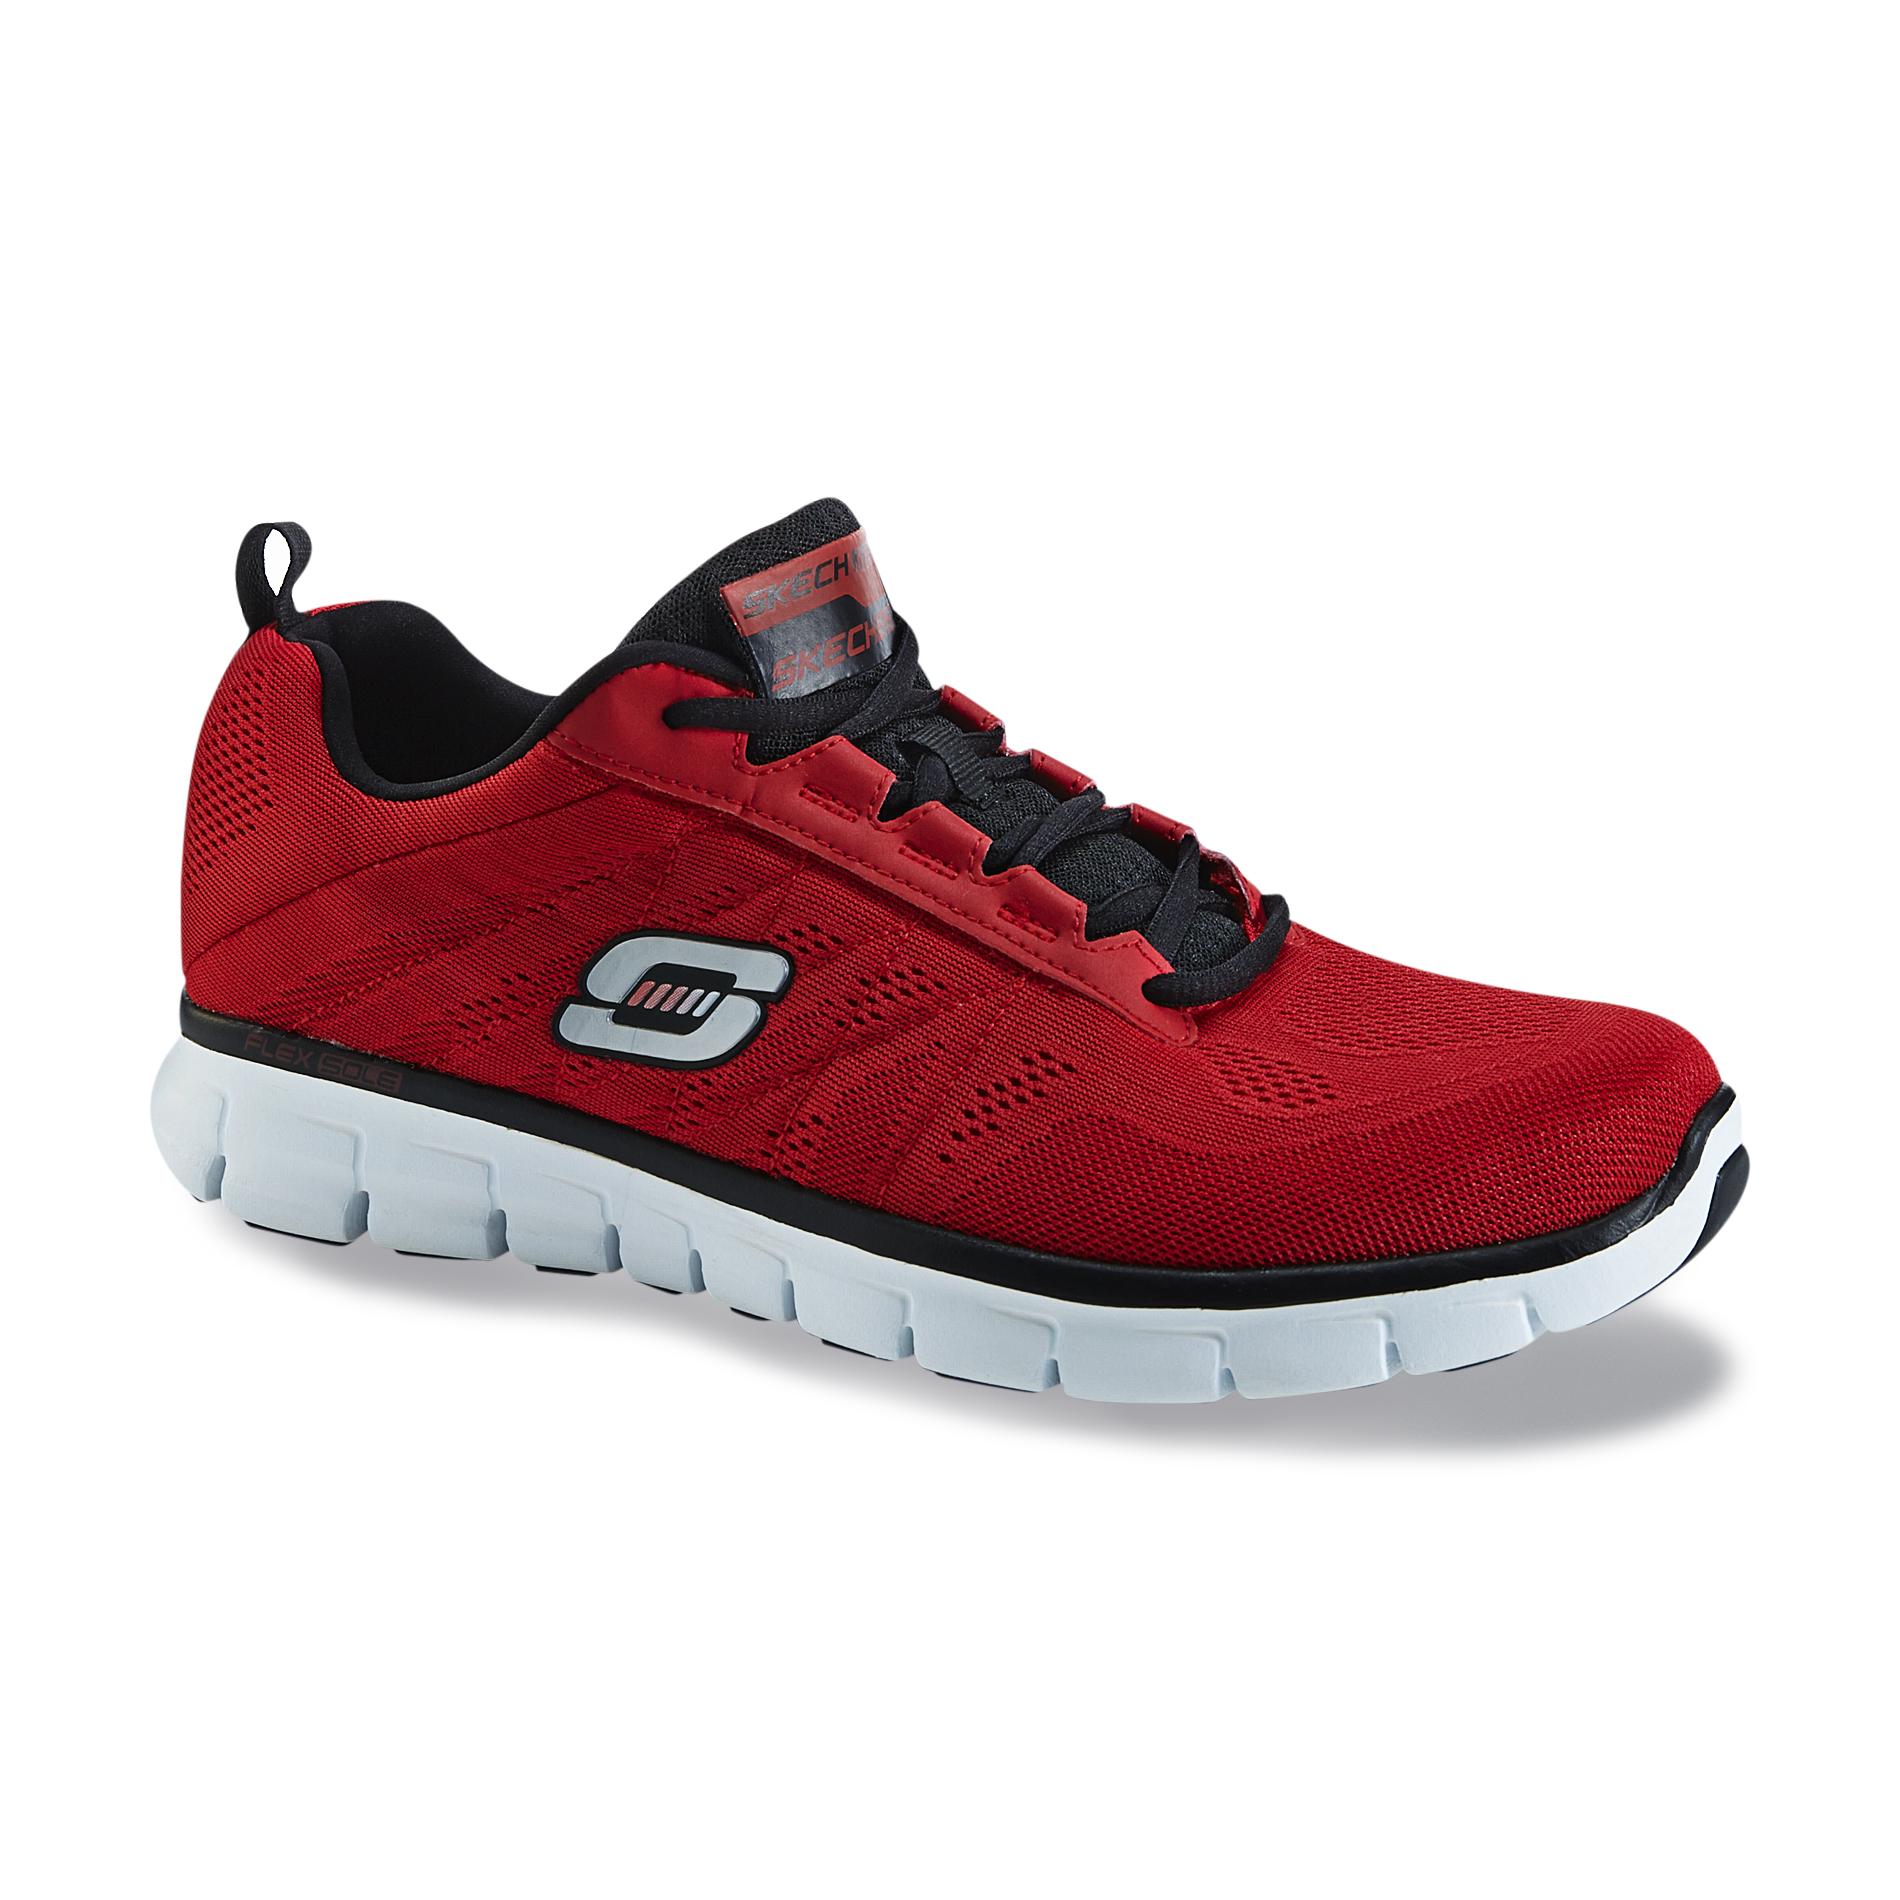 UPC 887047537467 - Skechers Men's Power Switch Red/Black Athletic Shoes ...